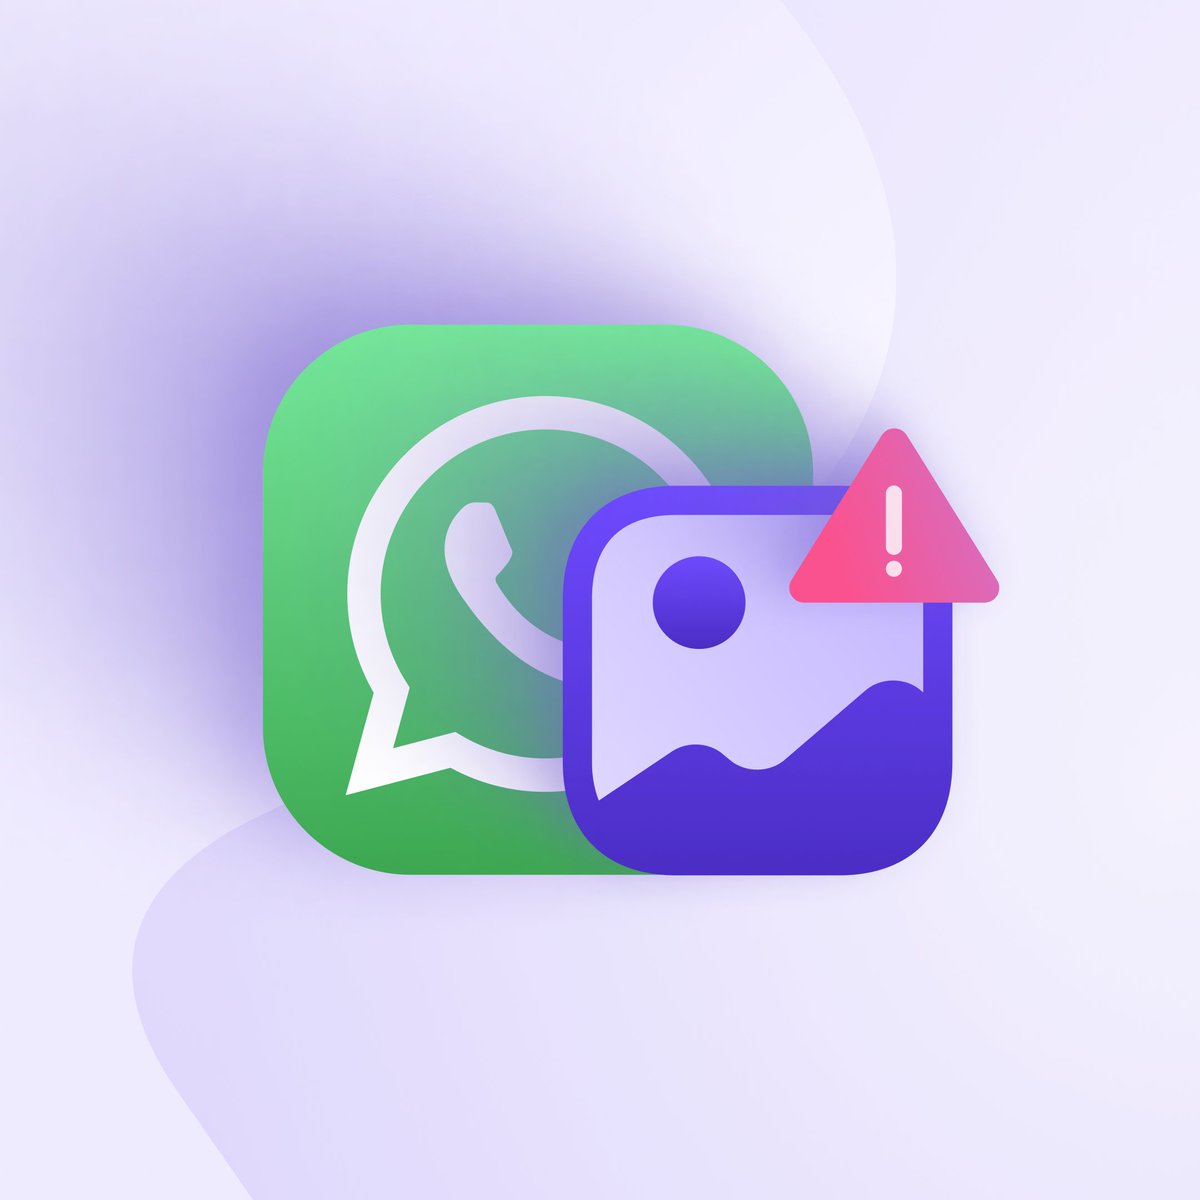 TL;DR While your private photos may be safe, WhatsApp and, by extension, all Meta services know you sent something, when you sent it, and who you sent it to. Read more about it here: proton.me/blog/whatsapp-…